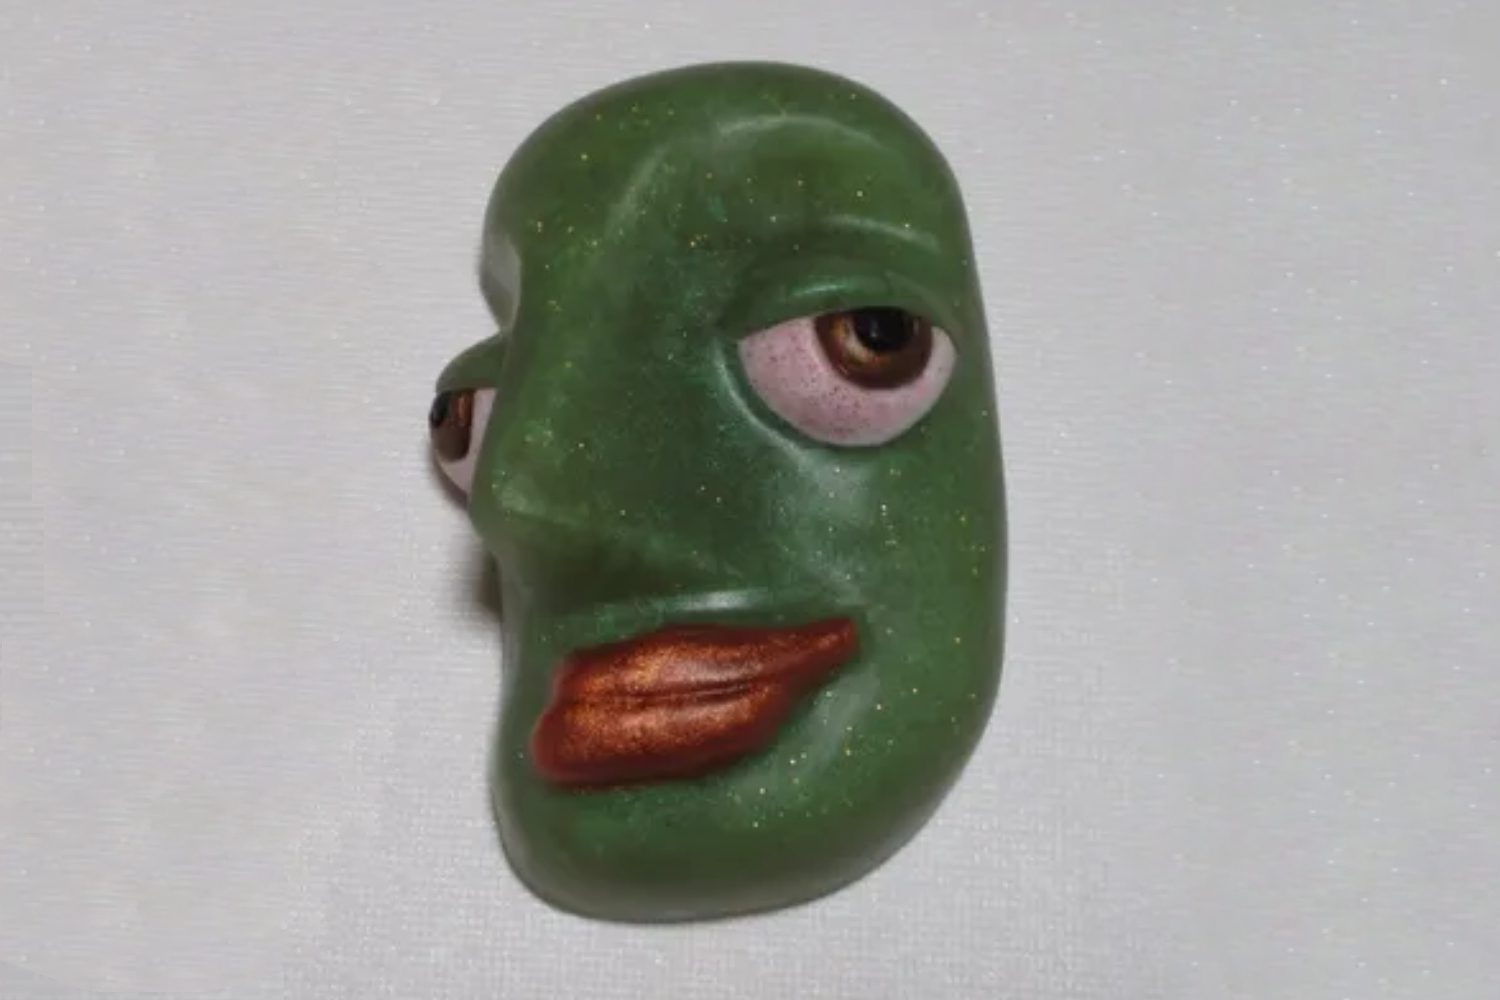 A green face with brown eyes and red lips.